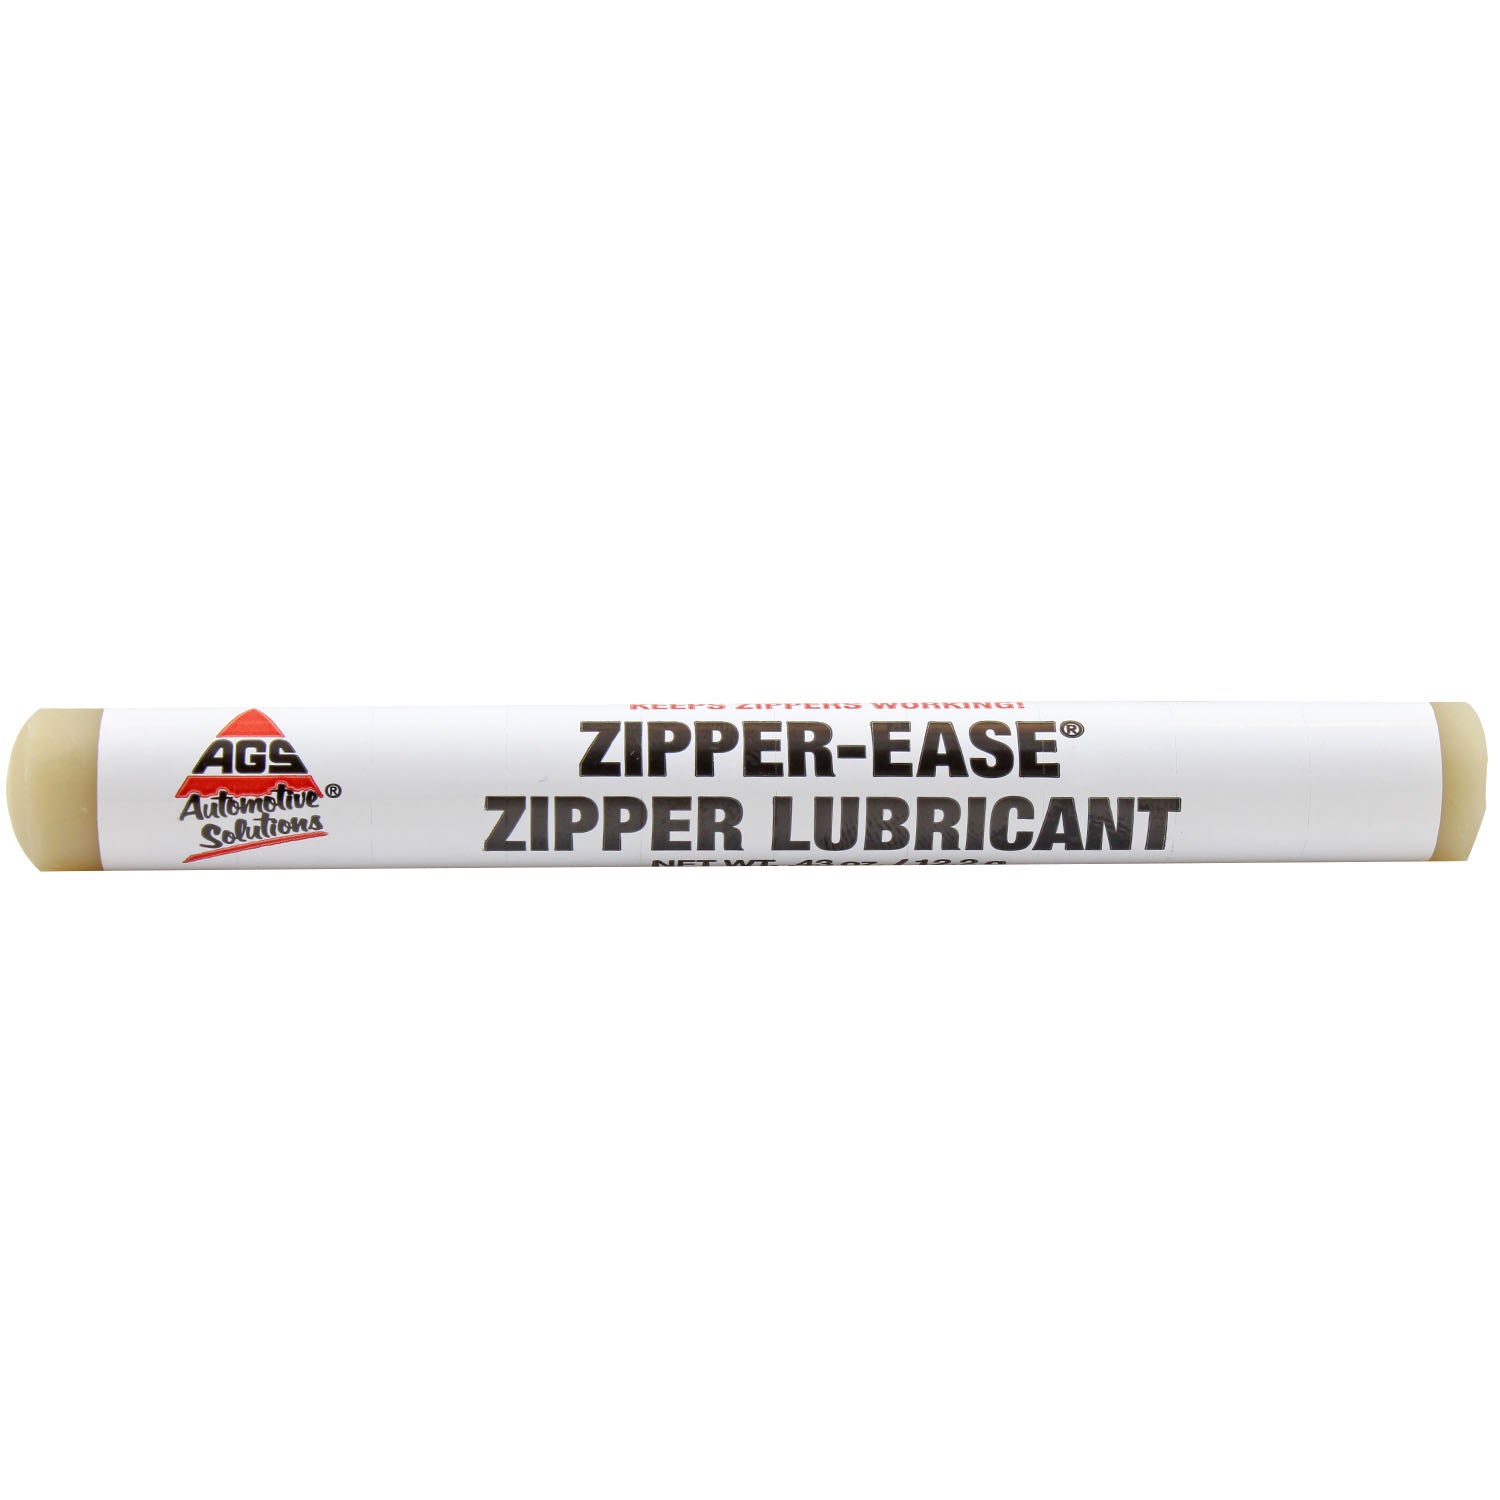 Zipper Ease zipper lubricant for Instrument cases garments outdoor sporting  gear